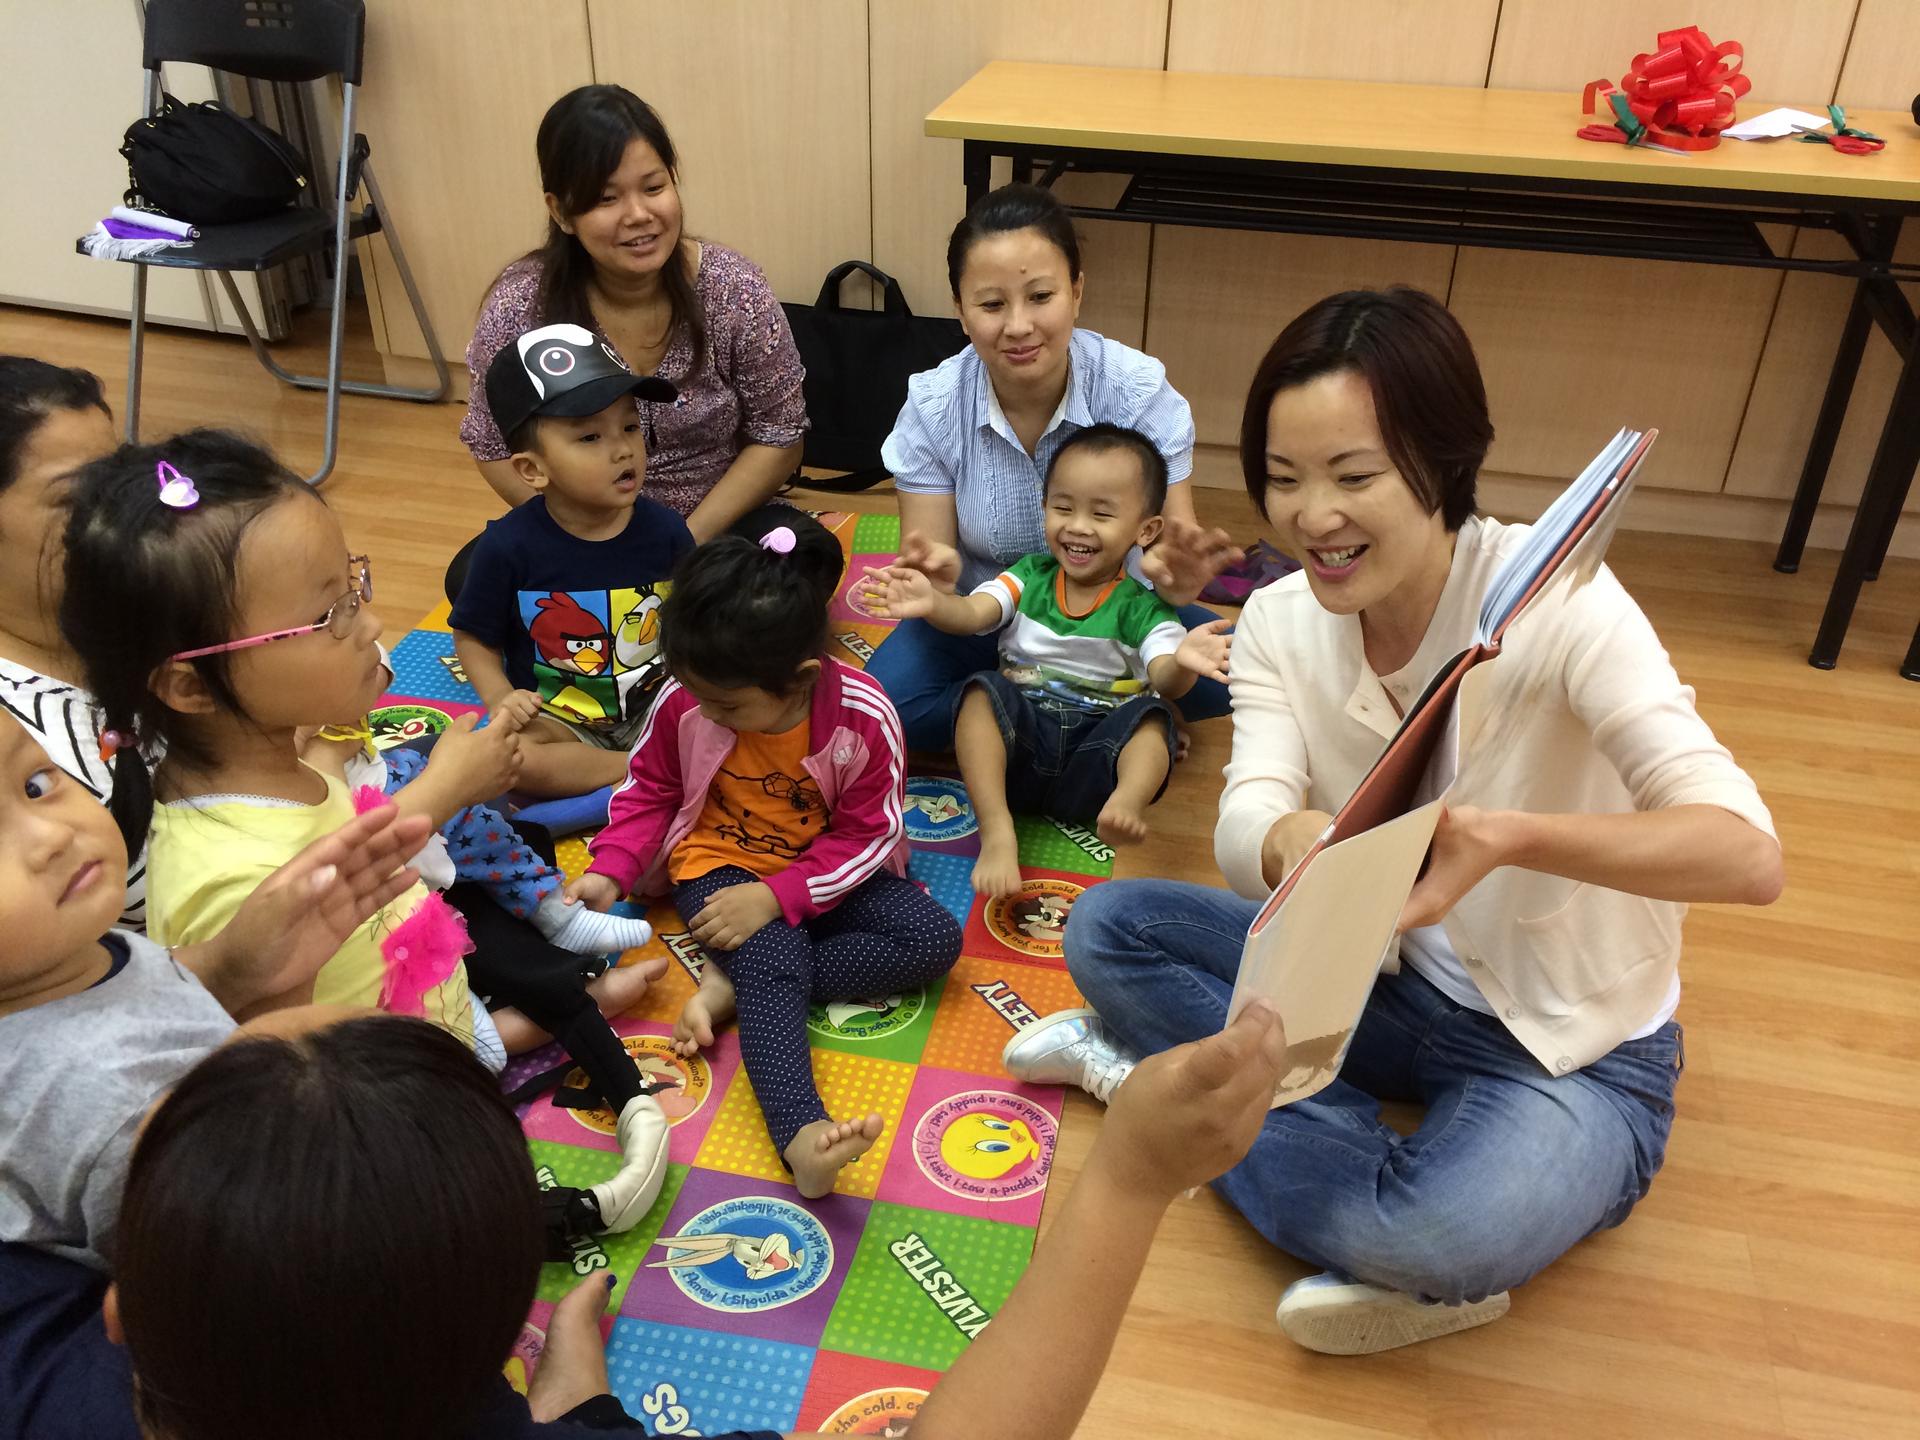 Michelle Liu from Bring Me A Book Hong Kong reads to children.